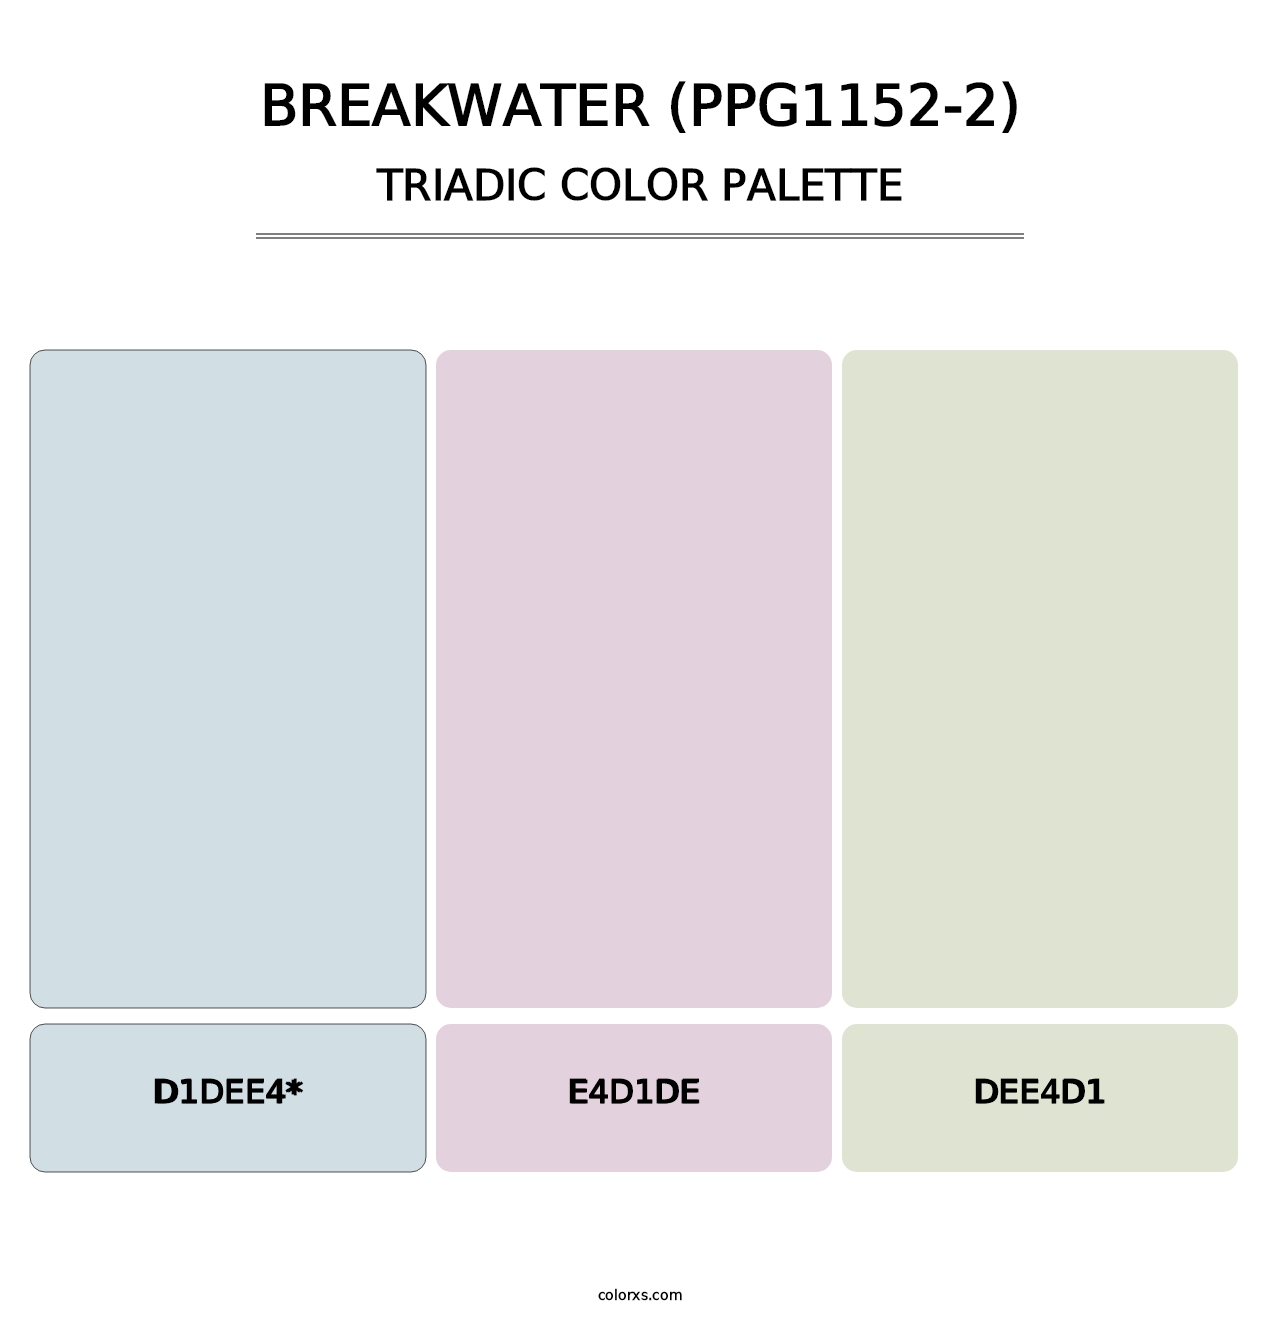 Breakwater (PPG1152-2) - Triadic Color Palette